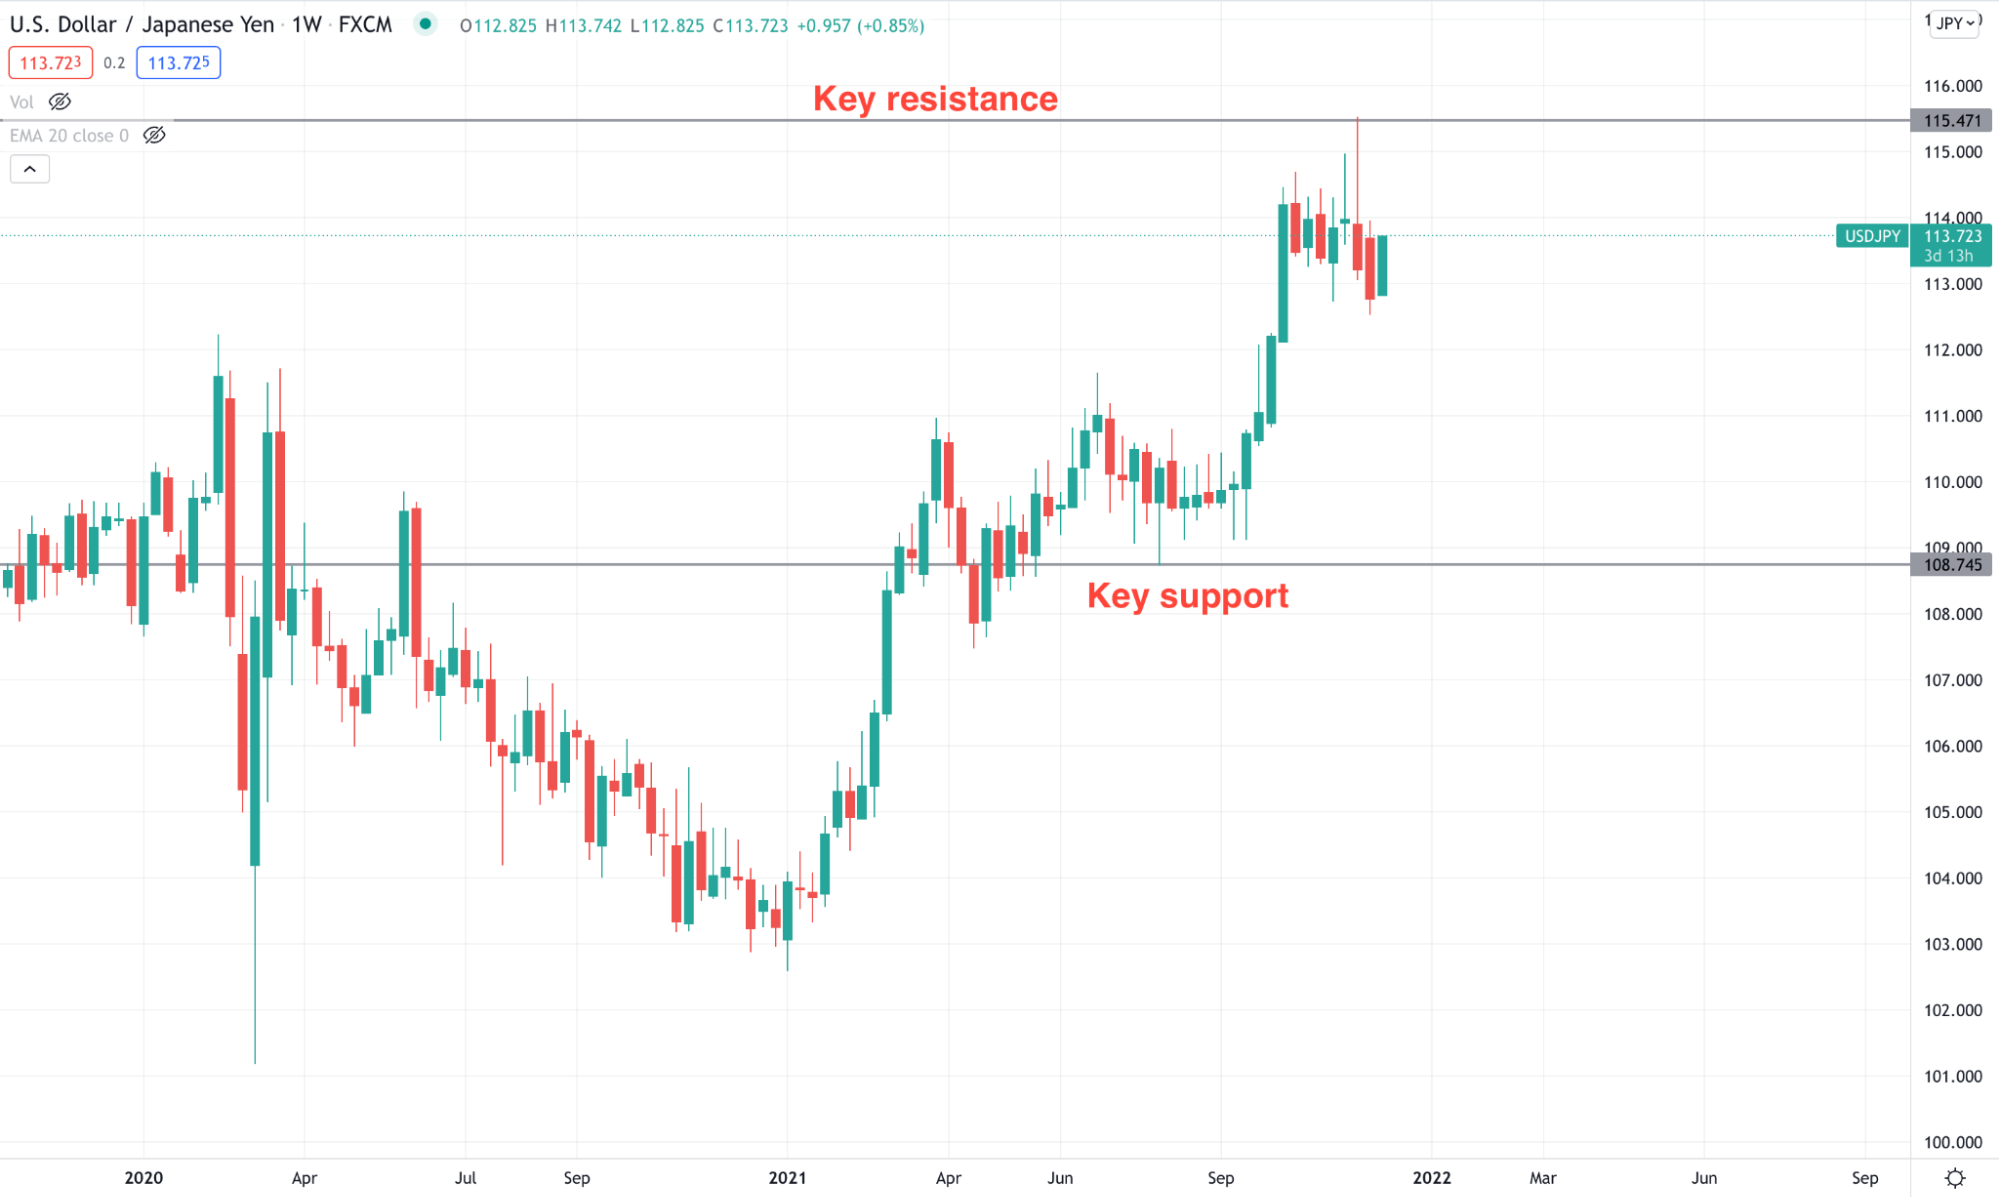 The key support and resistance level